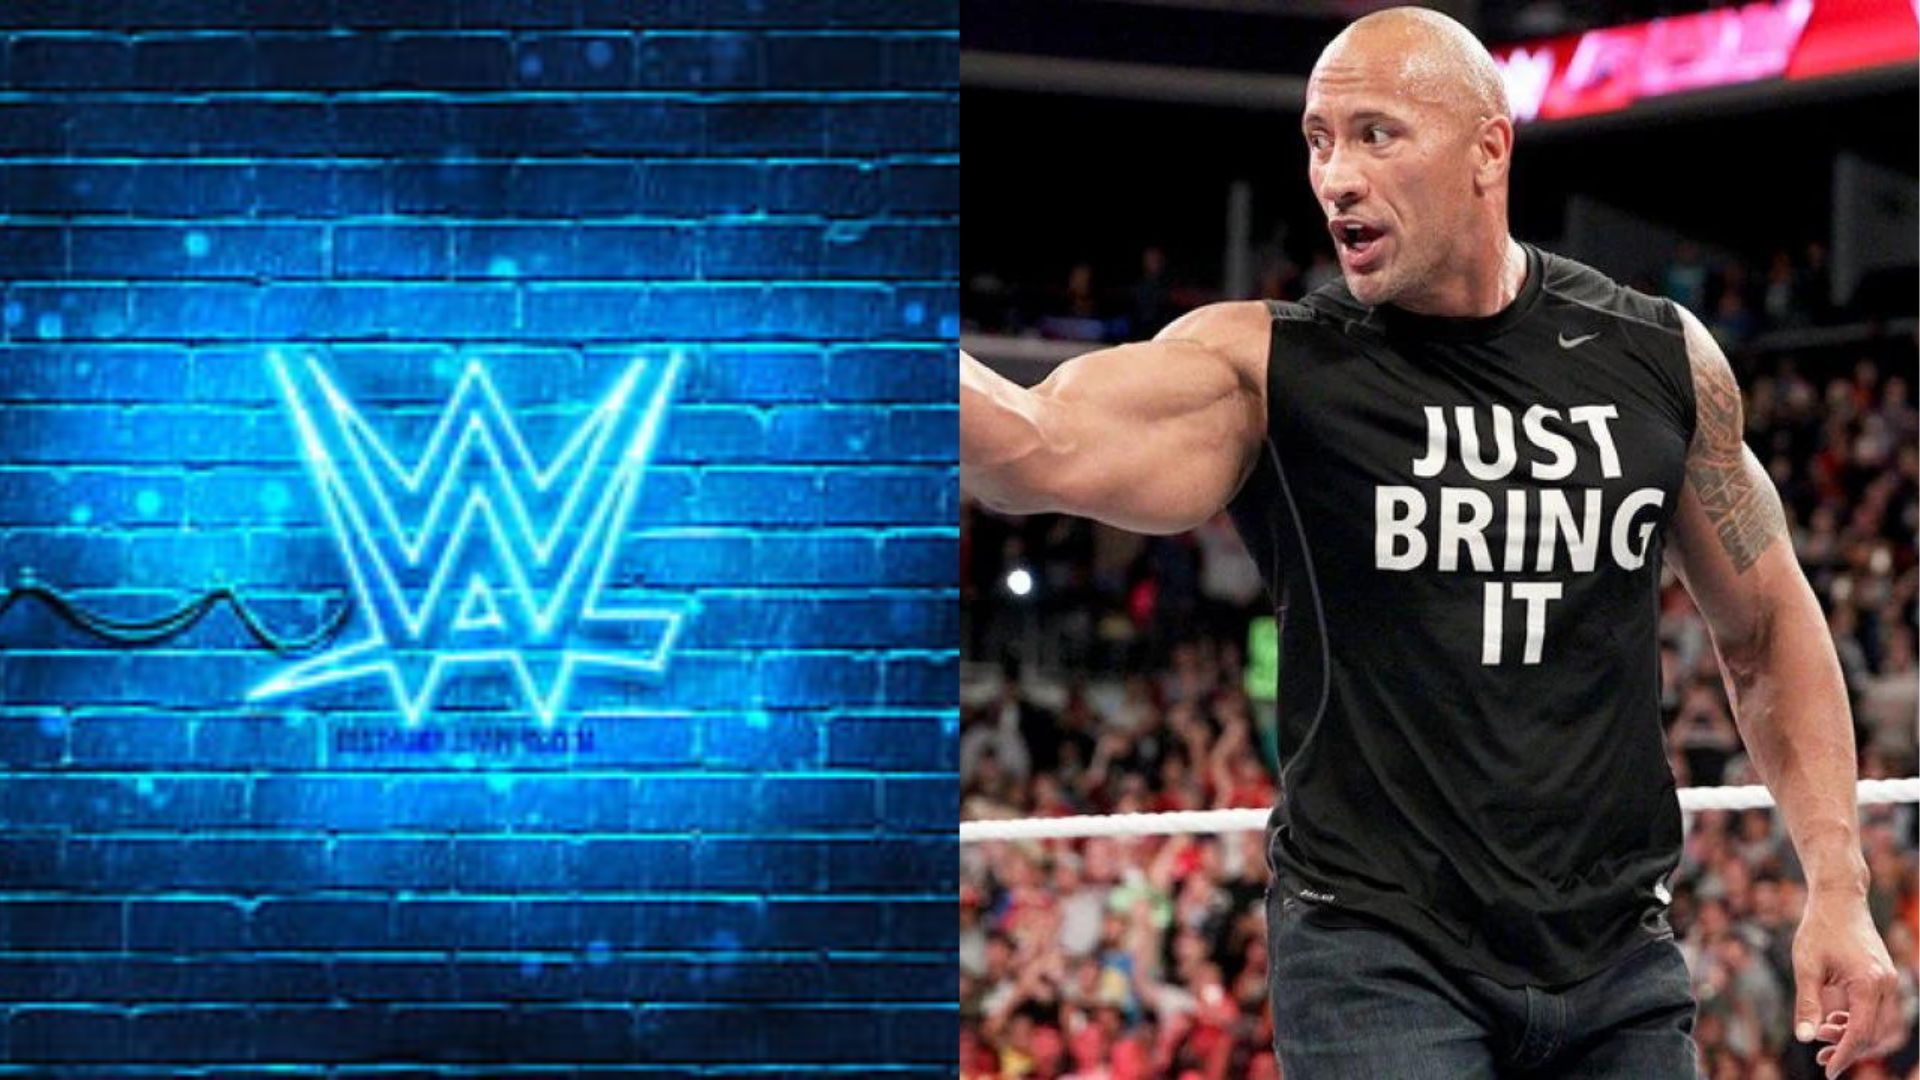 The Rock recently engaged in an interaction with a SmackDown star